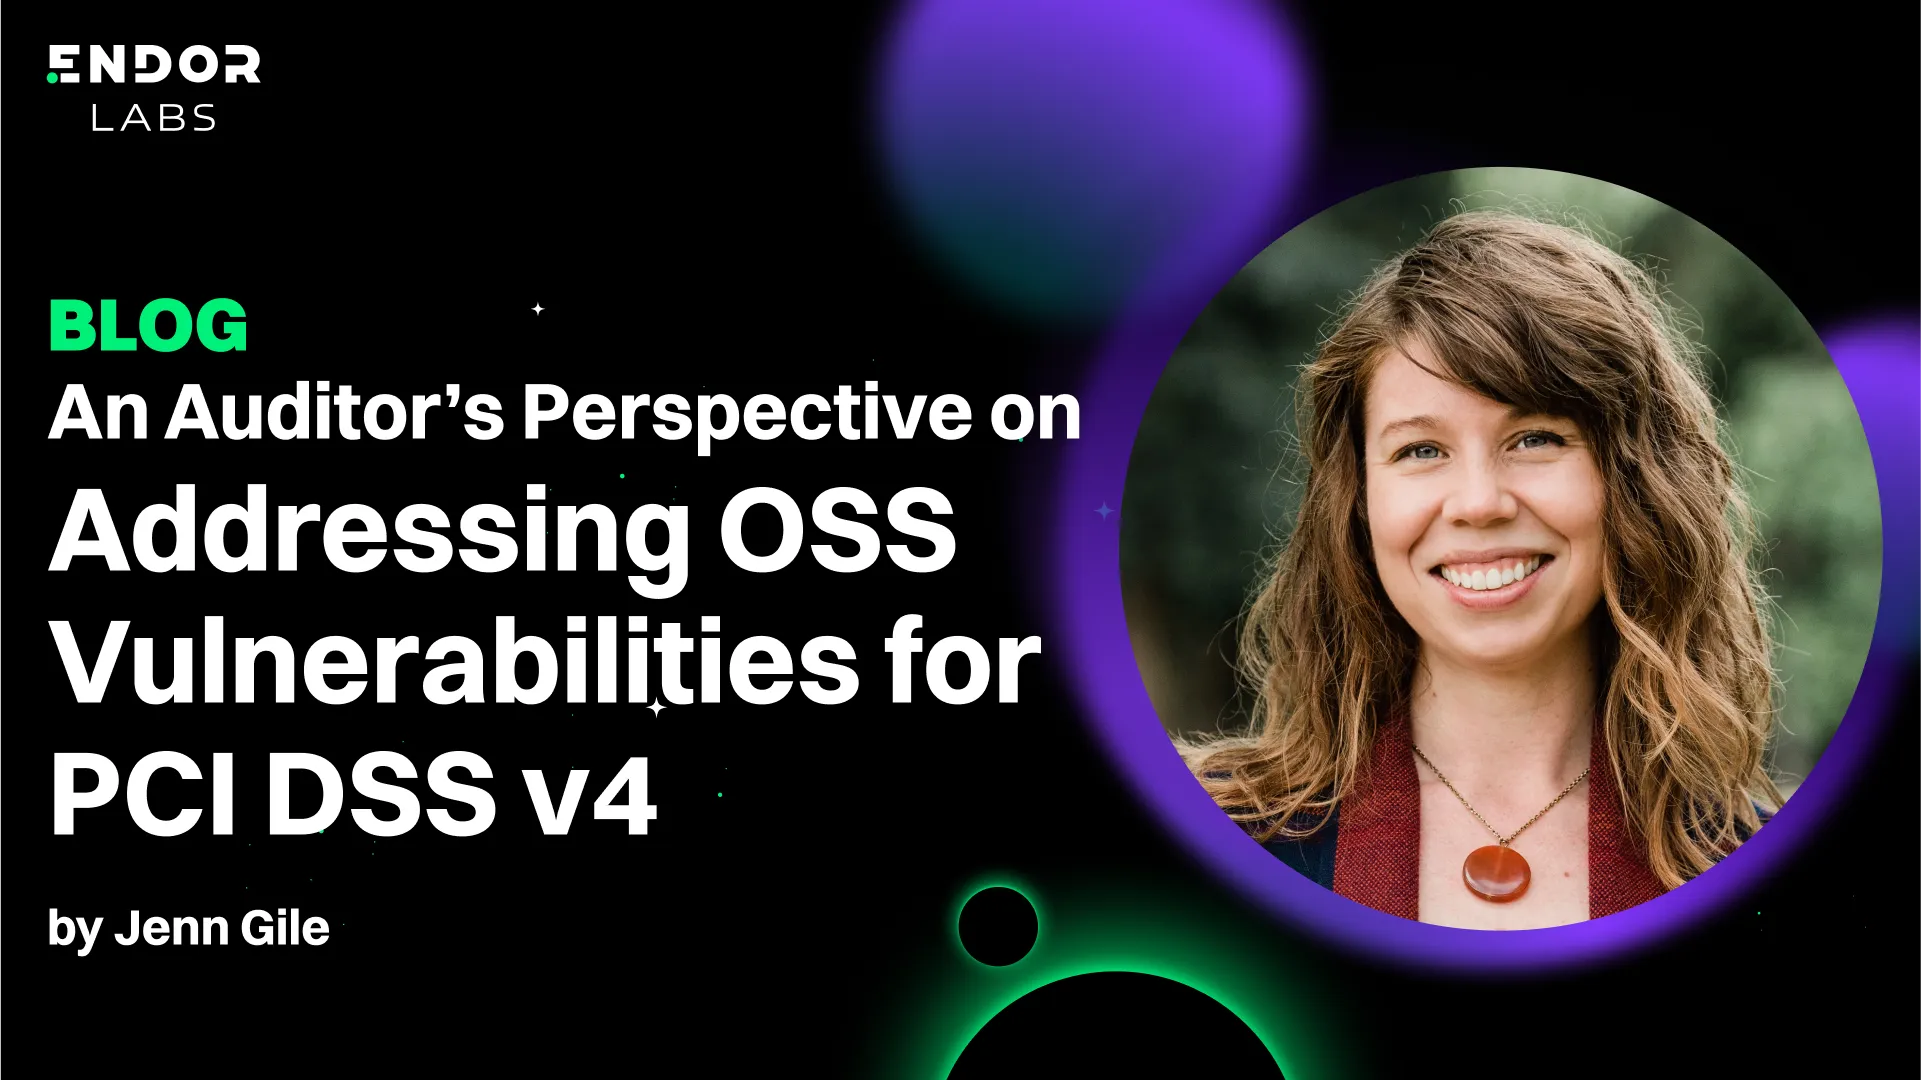 An Auditor’s Perspective on Addressing OSS Vulnerabilities for PCI DSS v4 by Jenn Gile